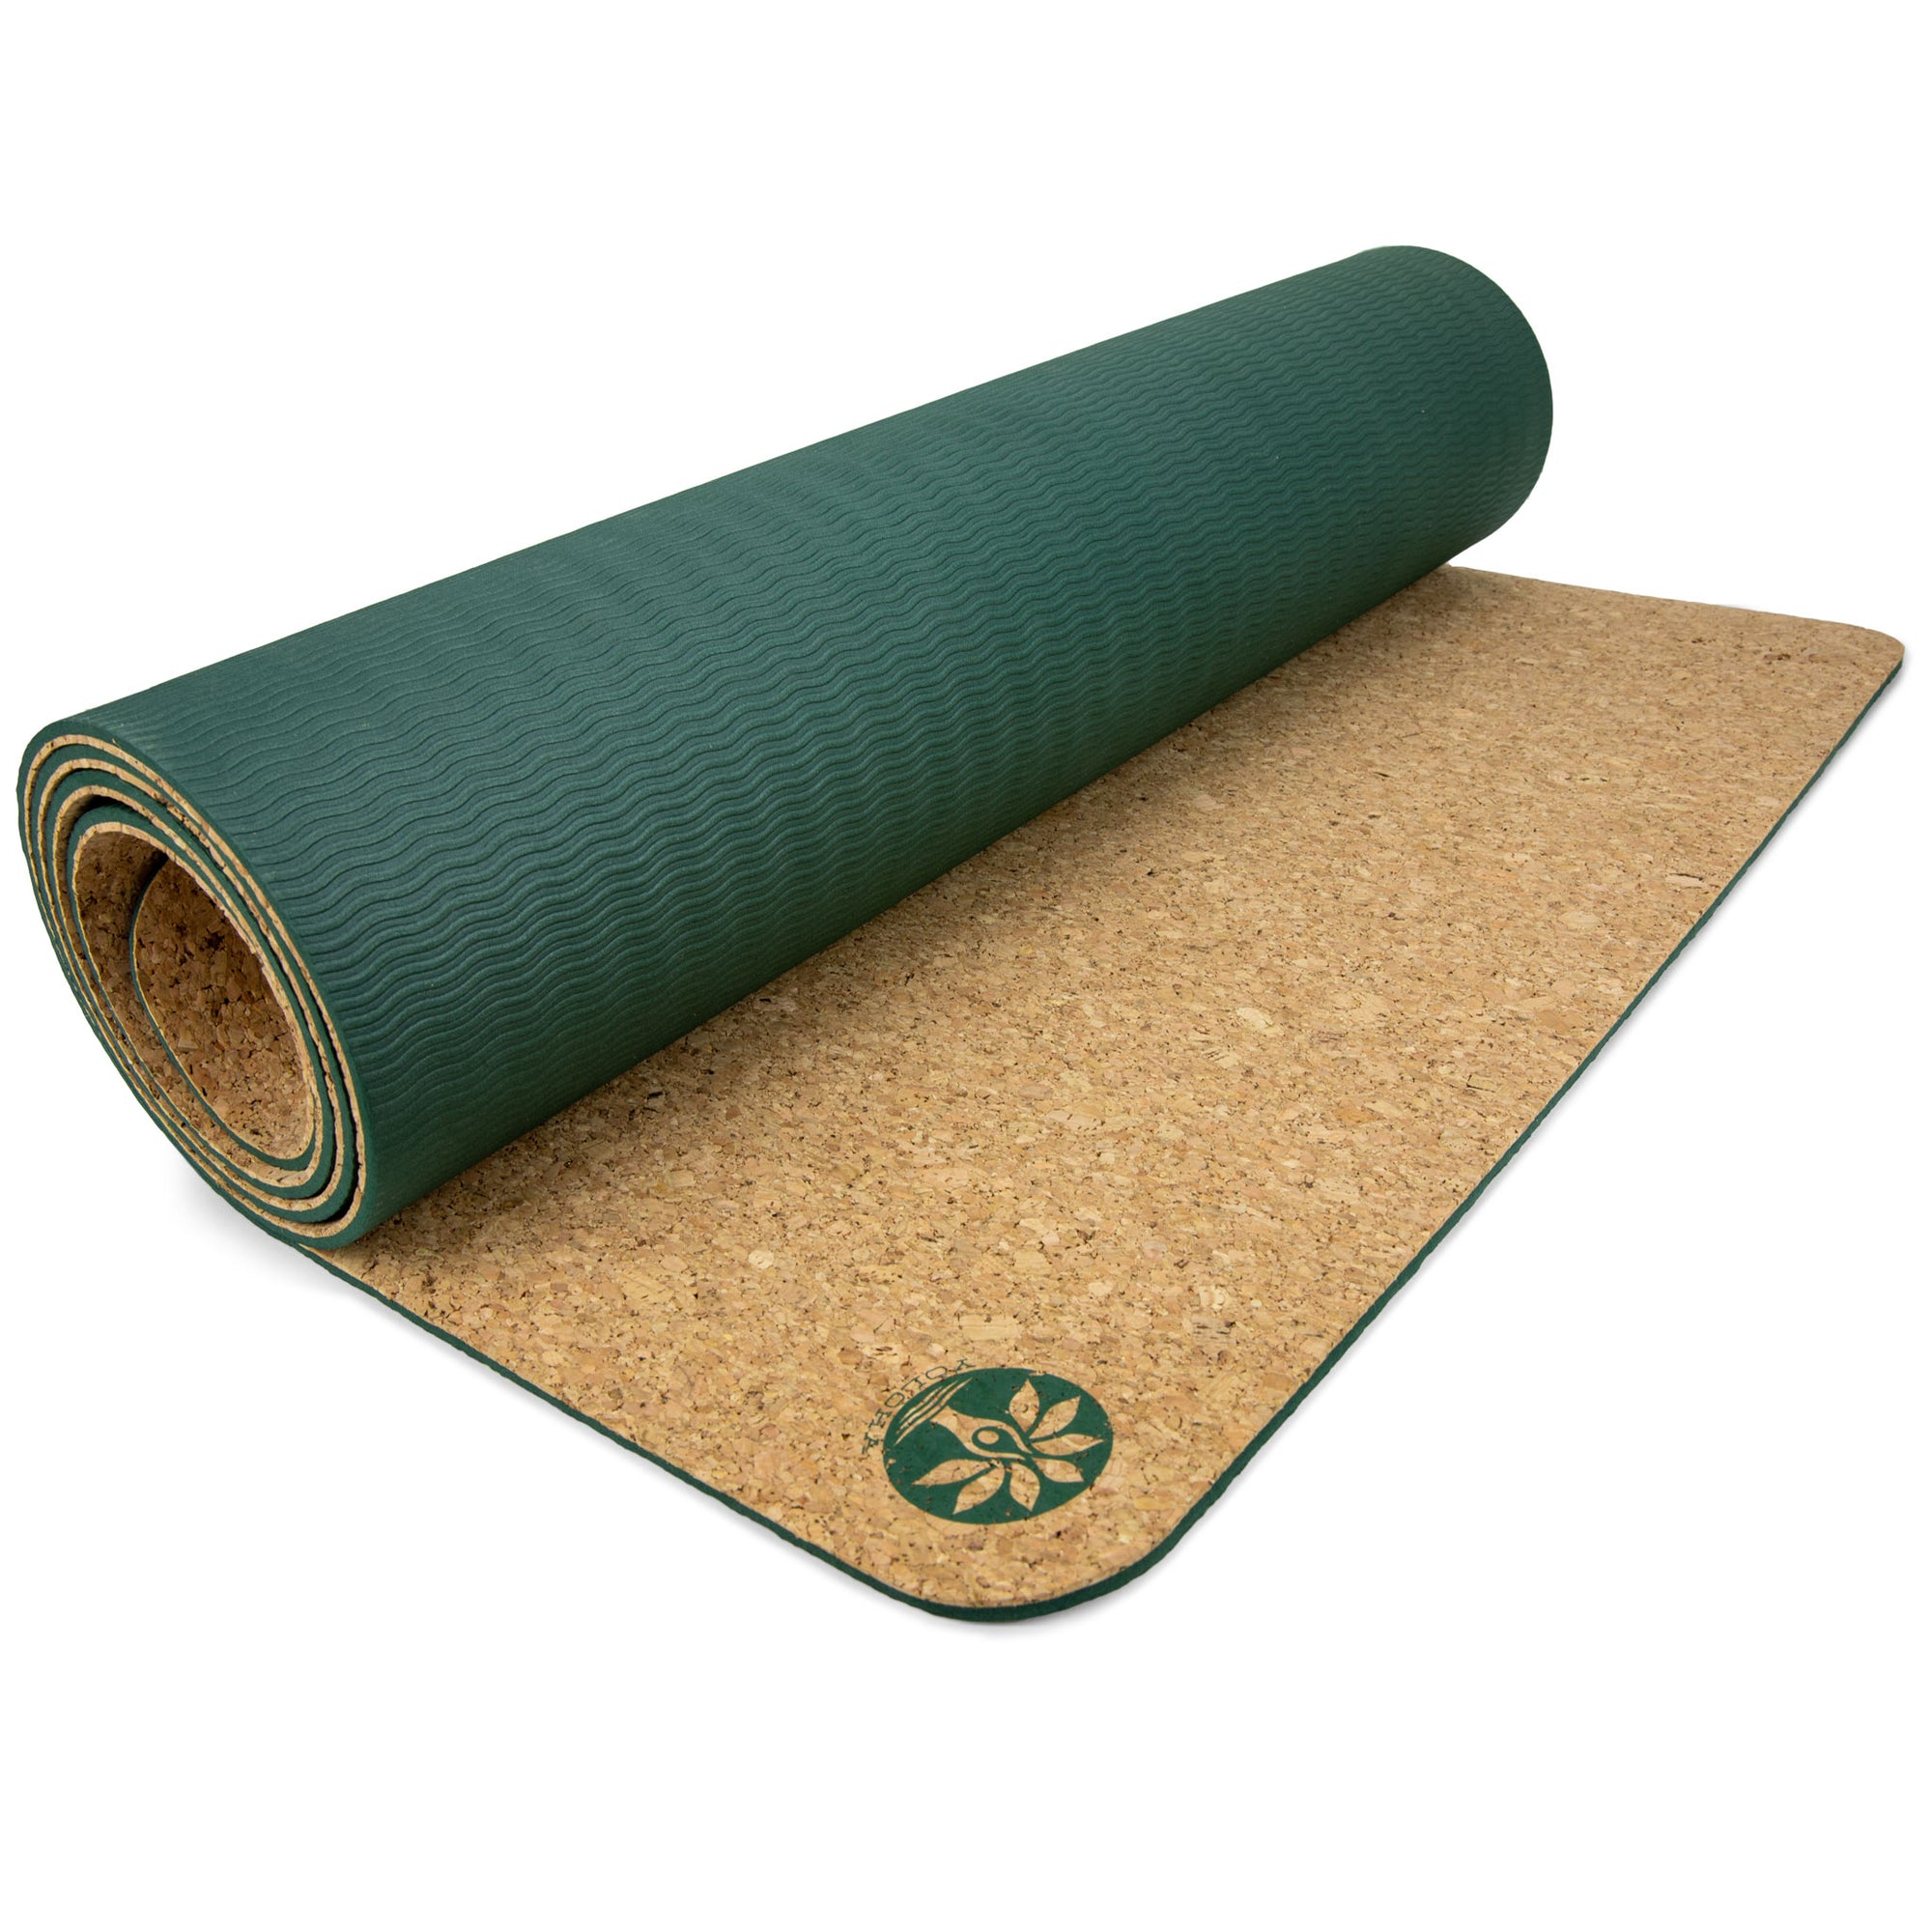 Is the Yogo Foldable Yoga Mat the Right Mat for Your Travels?